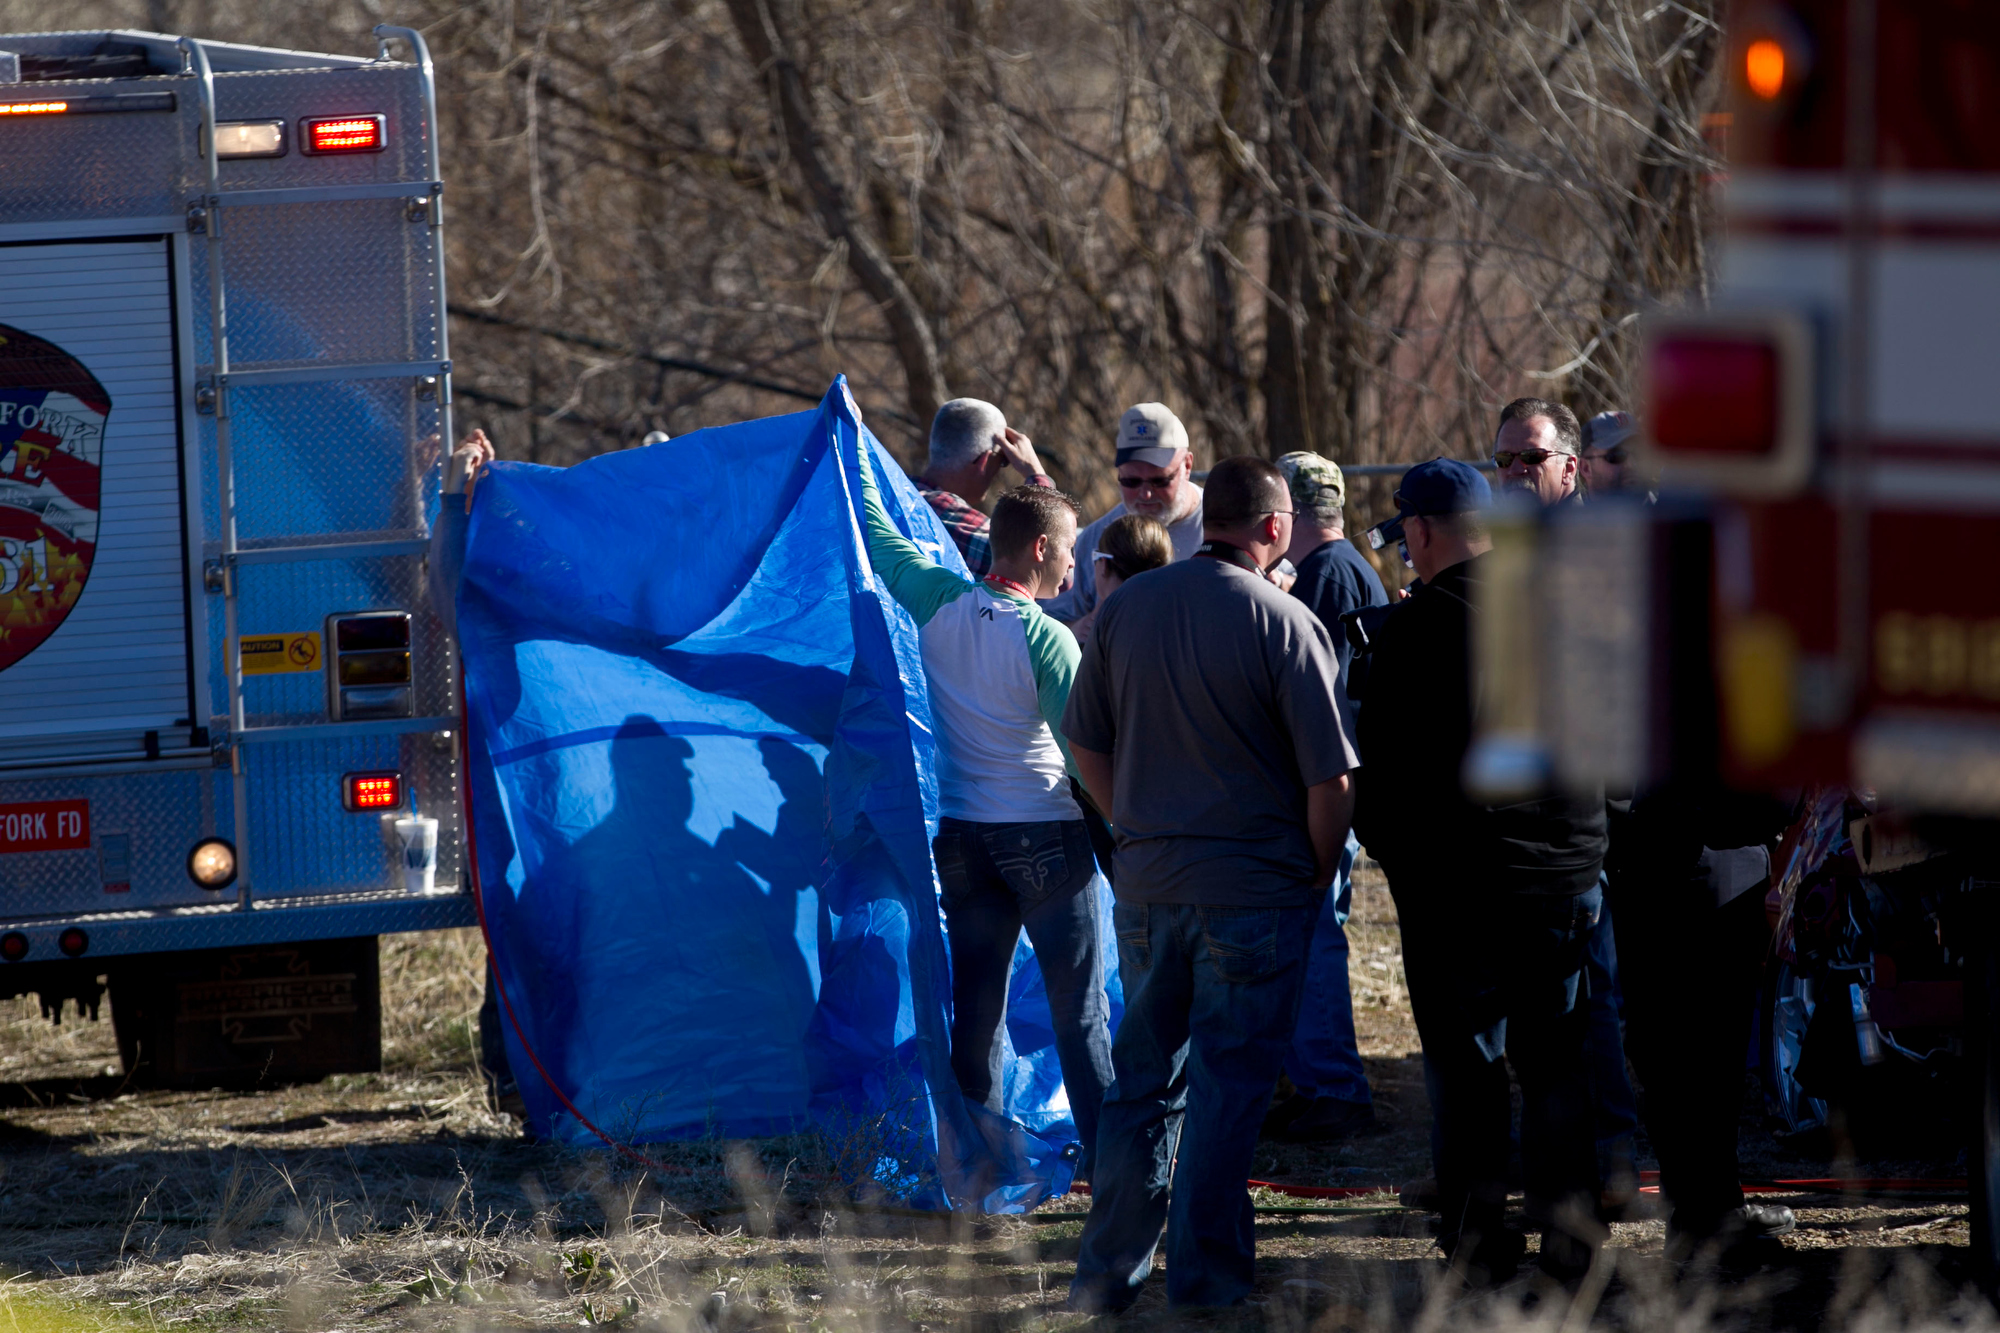 PHOTO: In this March 7, 2015 photo, officials respond to a report of car in the Spanish Fork River in Spanish Fork, Utah.